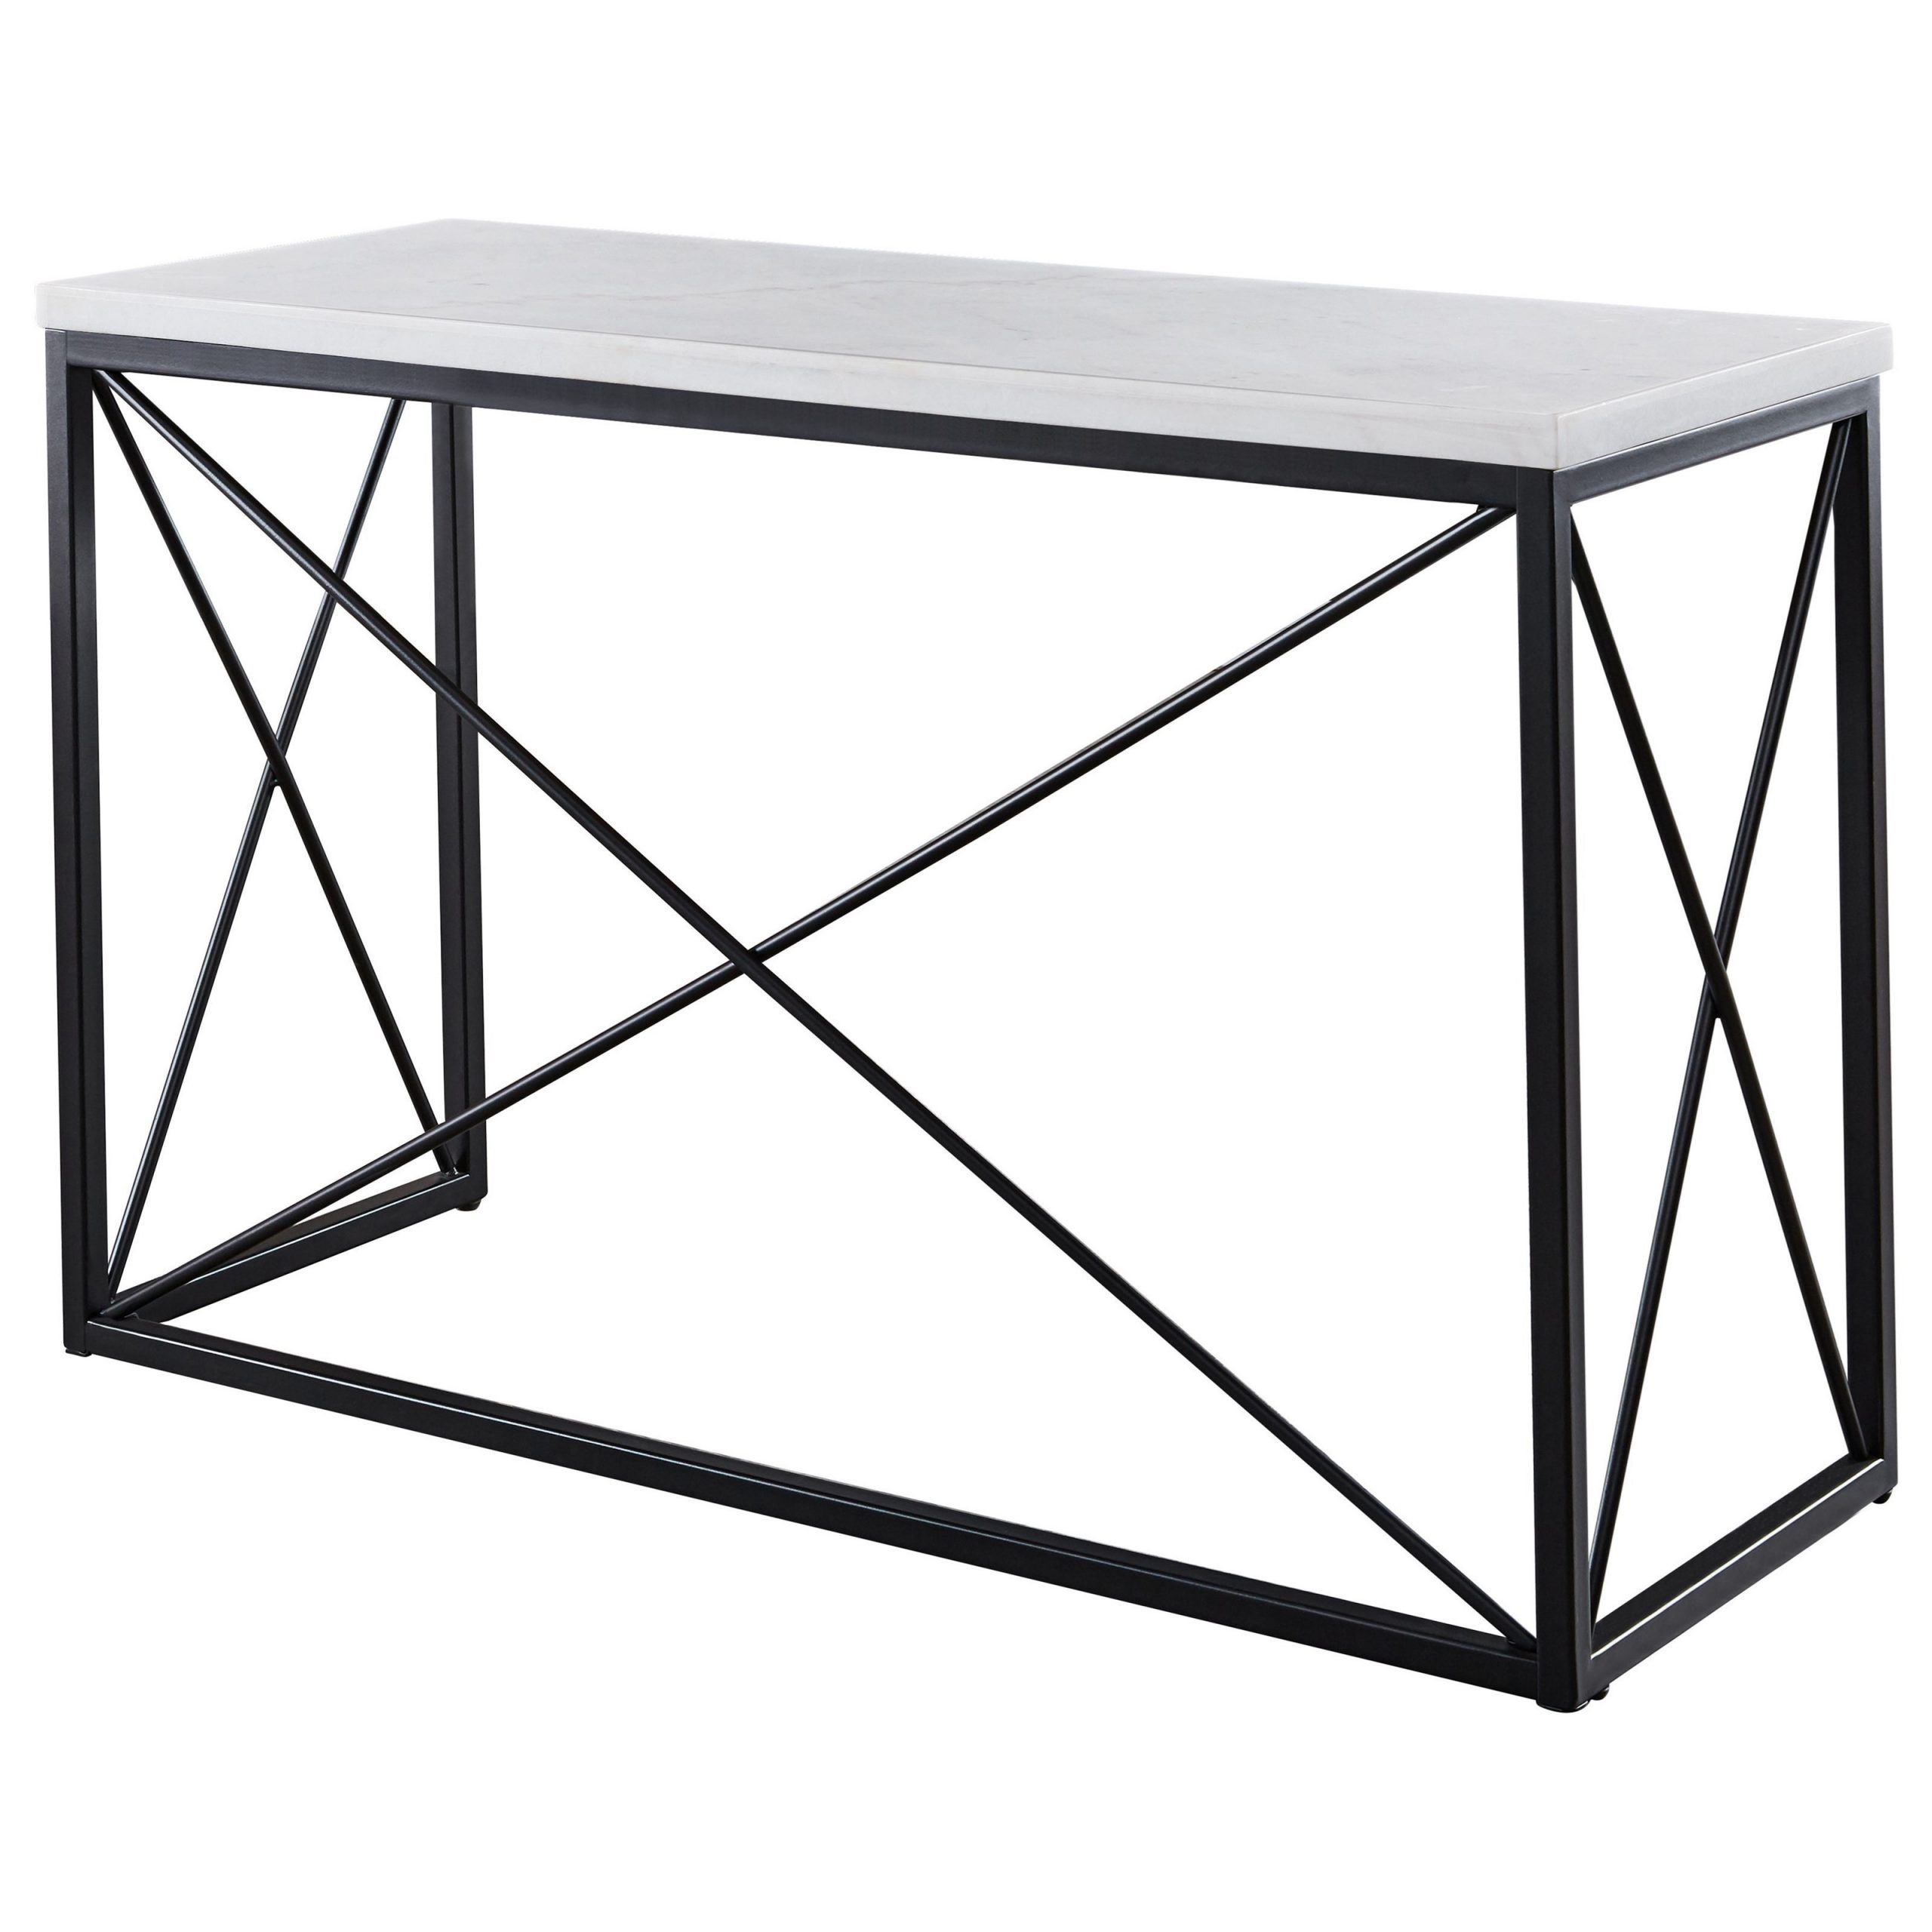 Steve Silver Skyler 1345002 Contemporary White Marble Top Rectangular In 1 Shelf Square Console Tables (View 13 of 20)